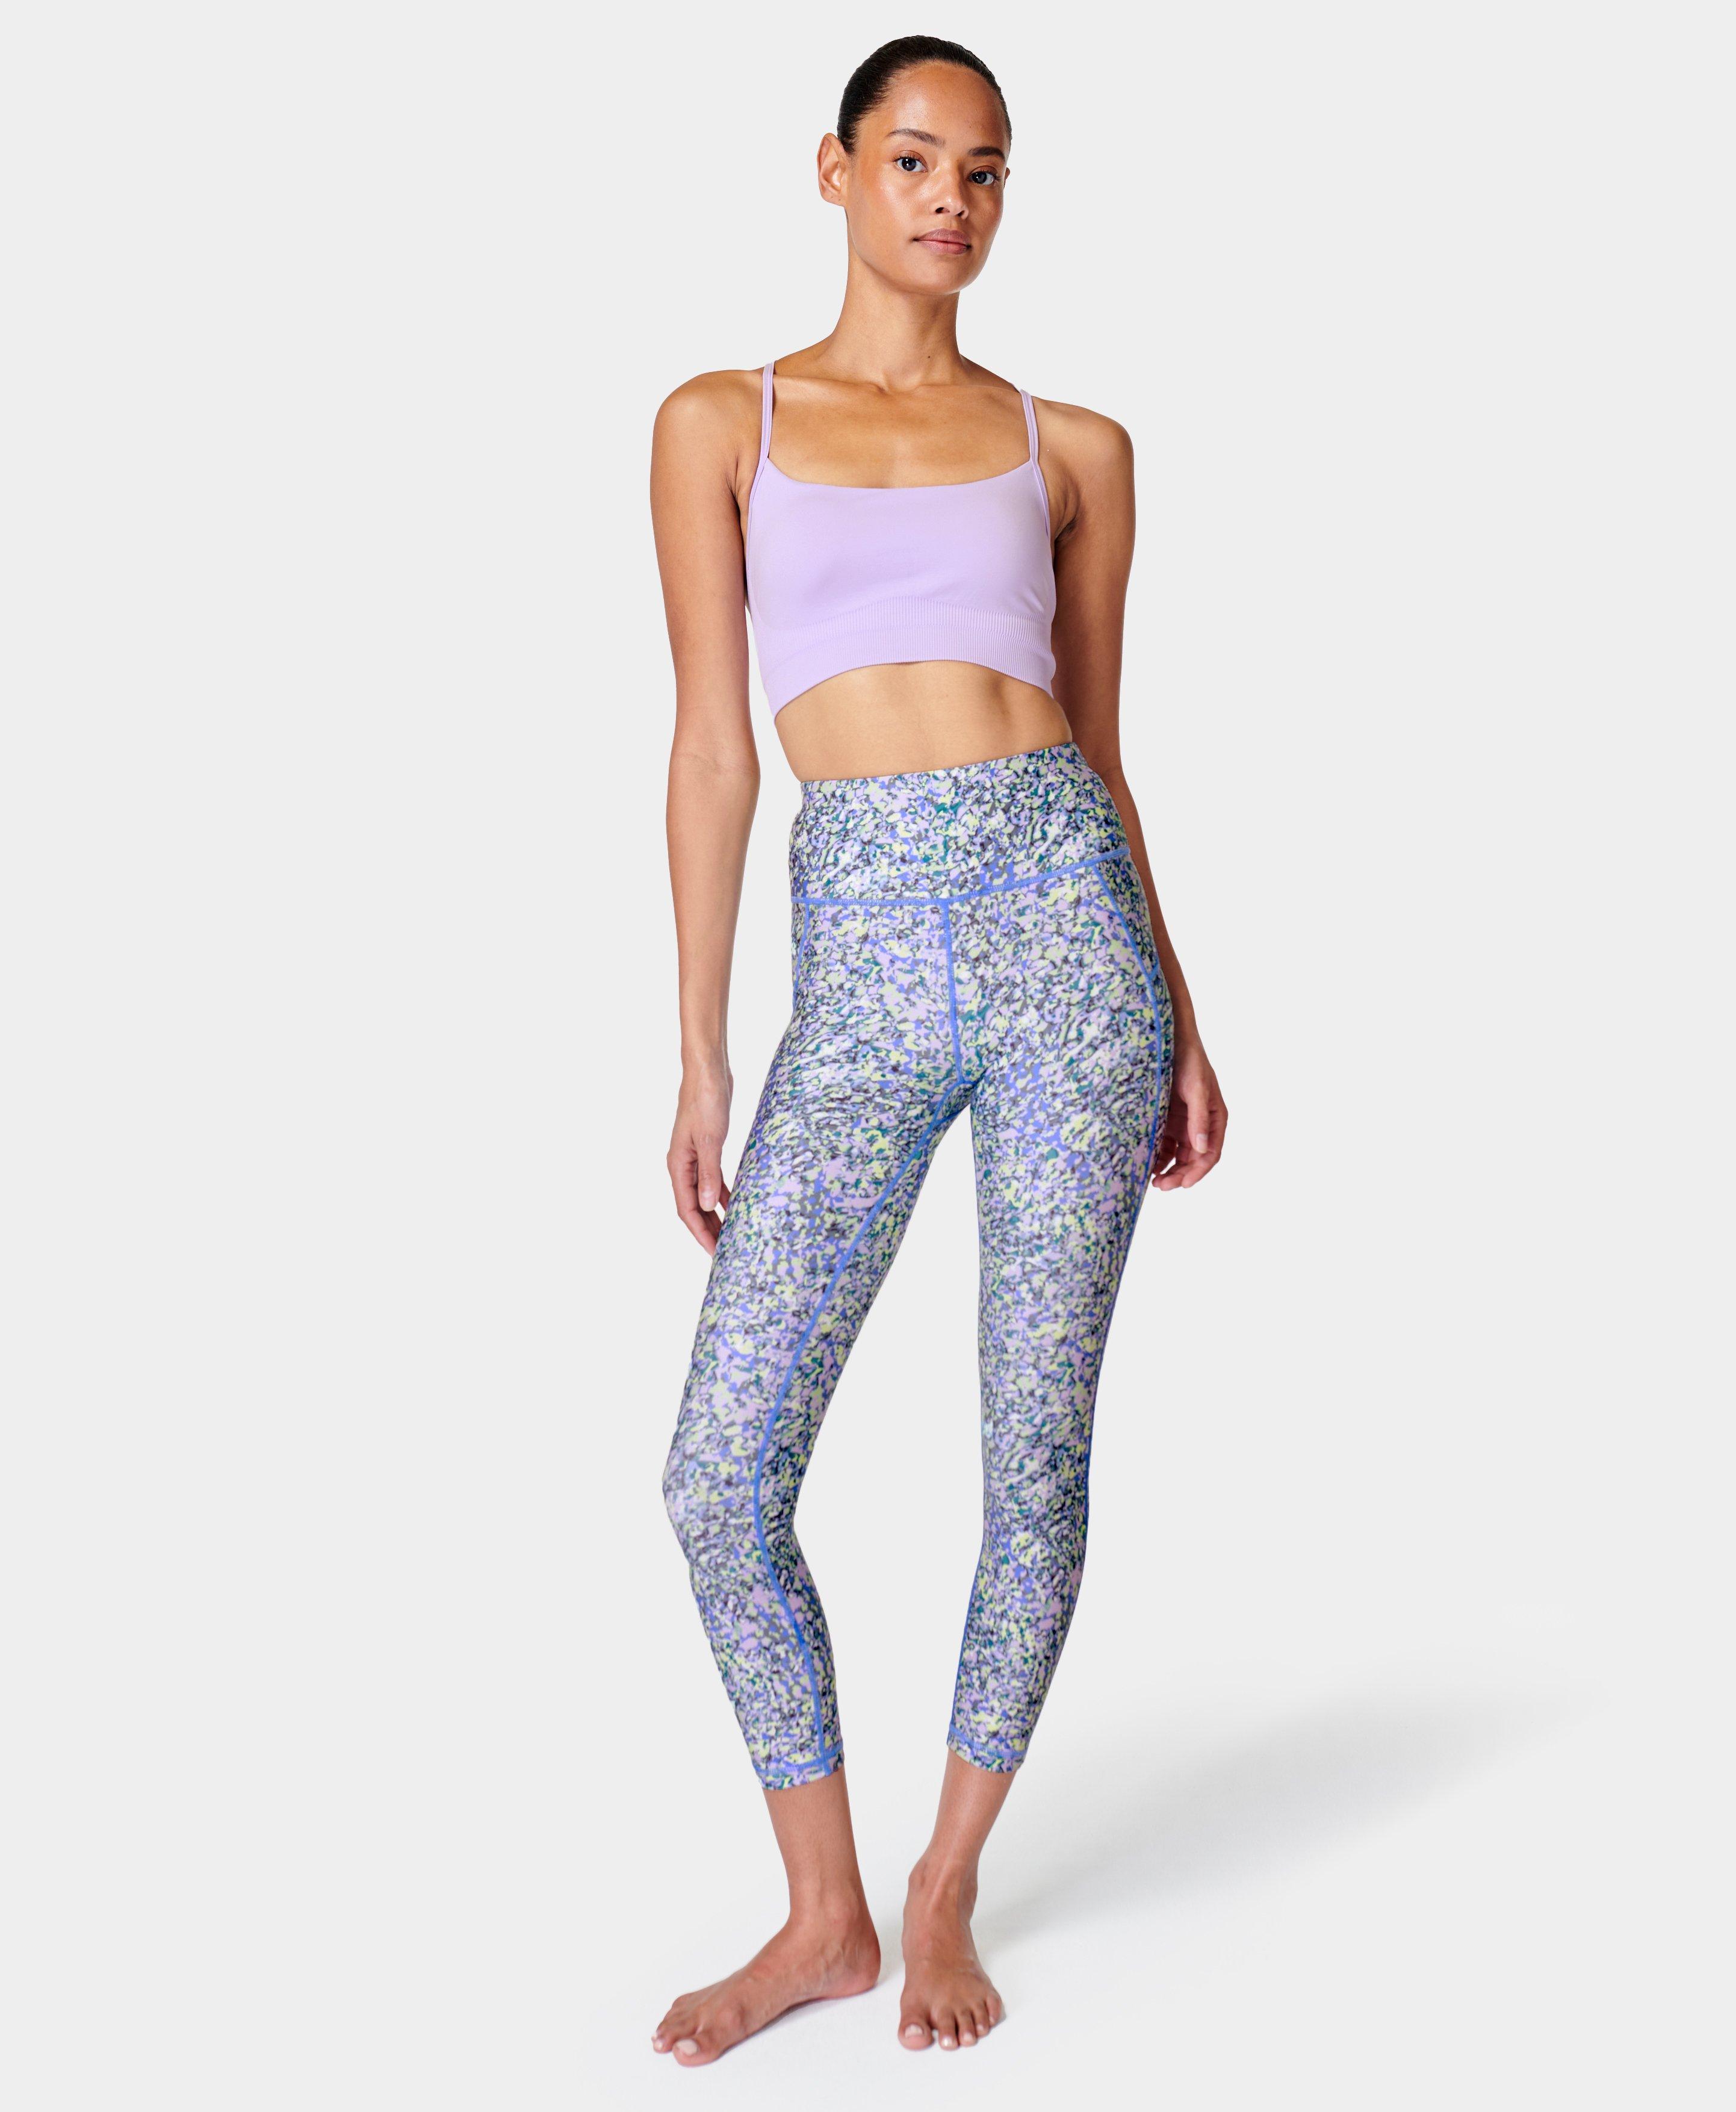 Sweaty Betty All Day Emboss 7/8 Gray Floral Workout Leggings Size XXS NWT -  $50 New With Tags - From Melissa